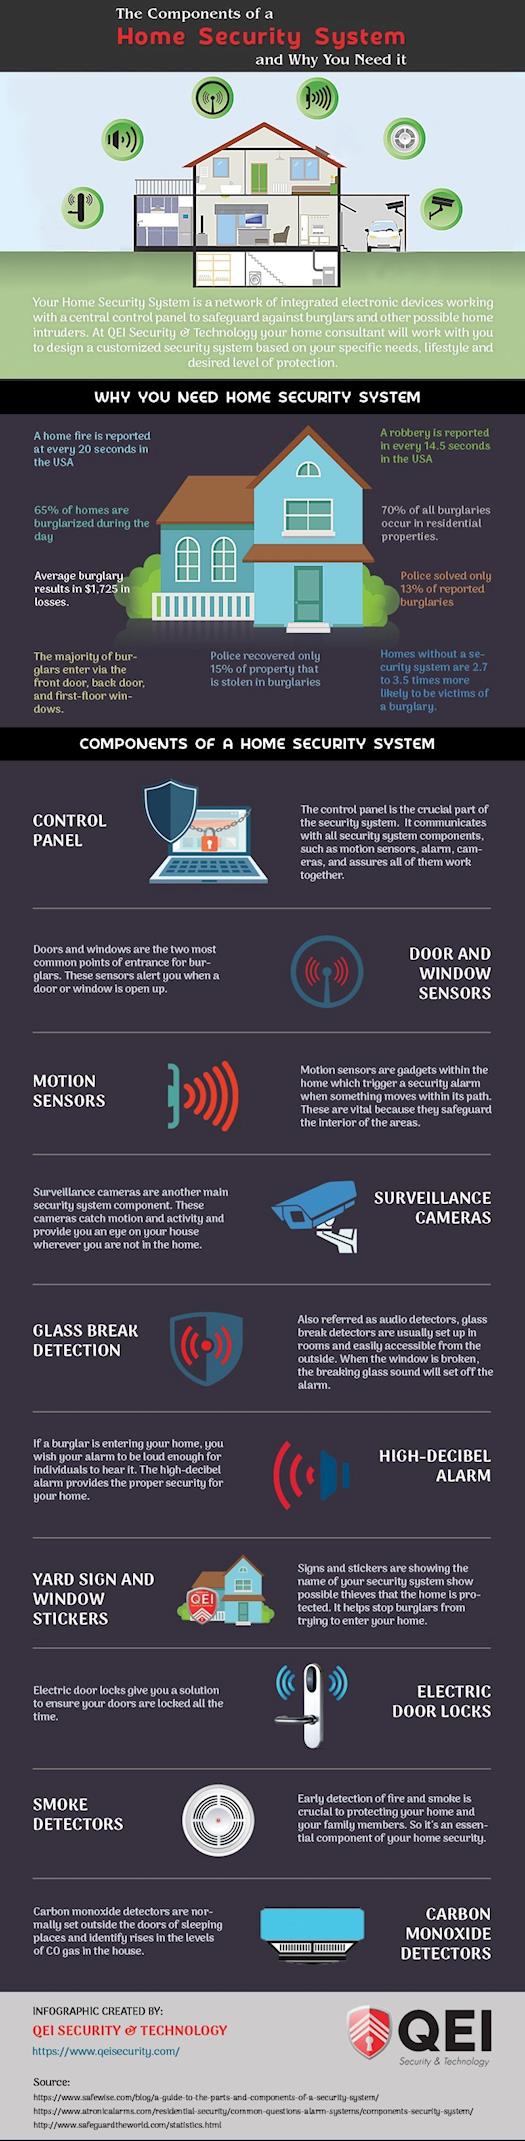 The Components of a Home Security System and Why You Need It